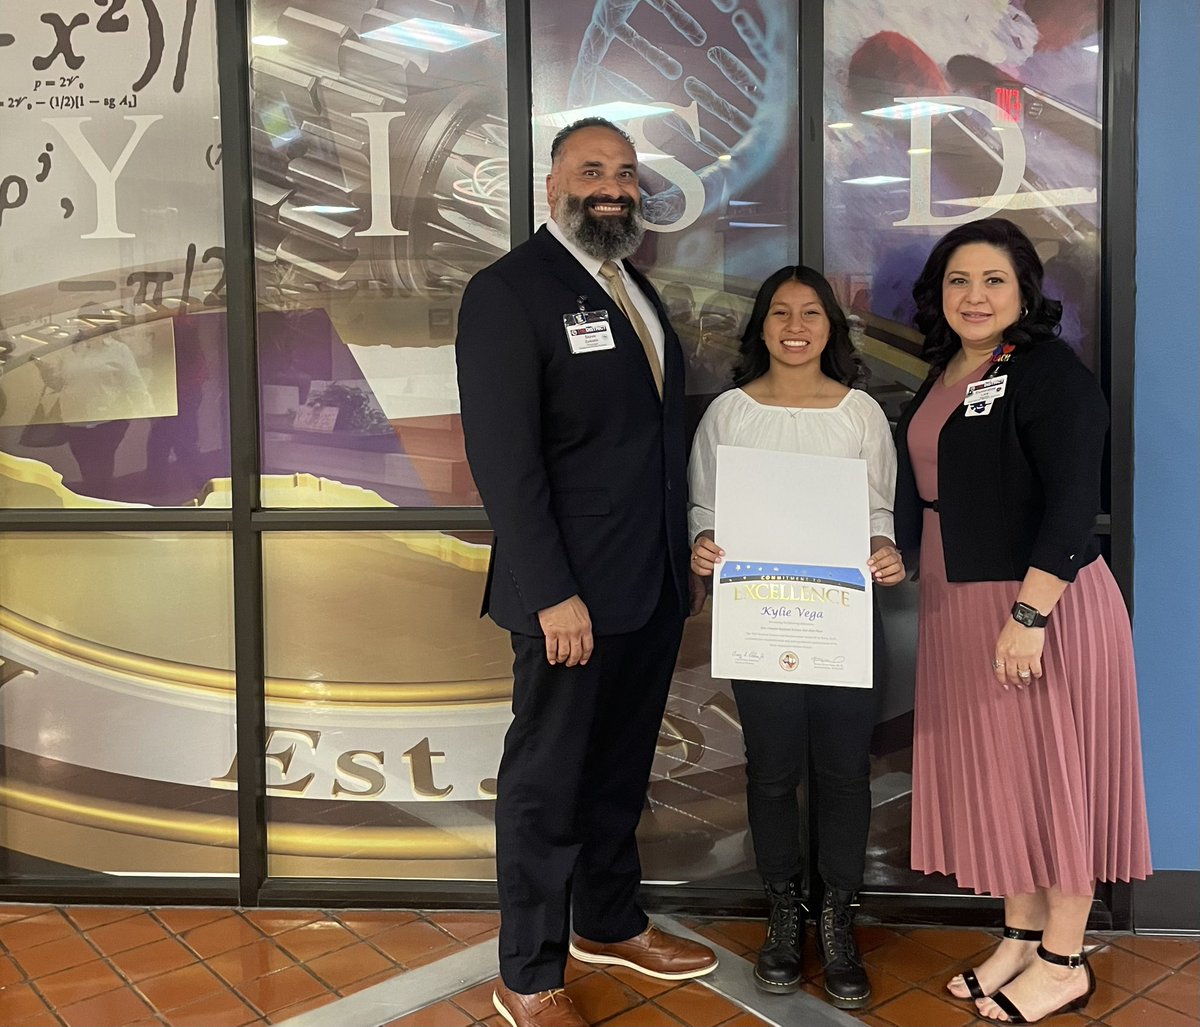 Proud mom moment!! Kylie received YISD board recognition for getting 1st place at The Sun Country Regional Science Fair and is headed to Texas A & M to represent @EMS_Raiders this weekend!! Thank you to Ms. Lara & Ms. Rubio for all your hard work and guidance to get her here!!